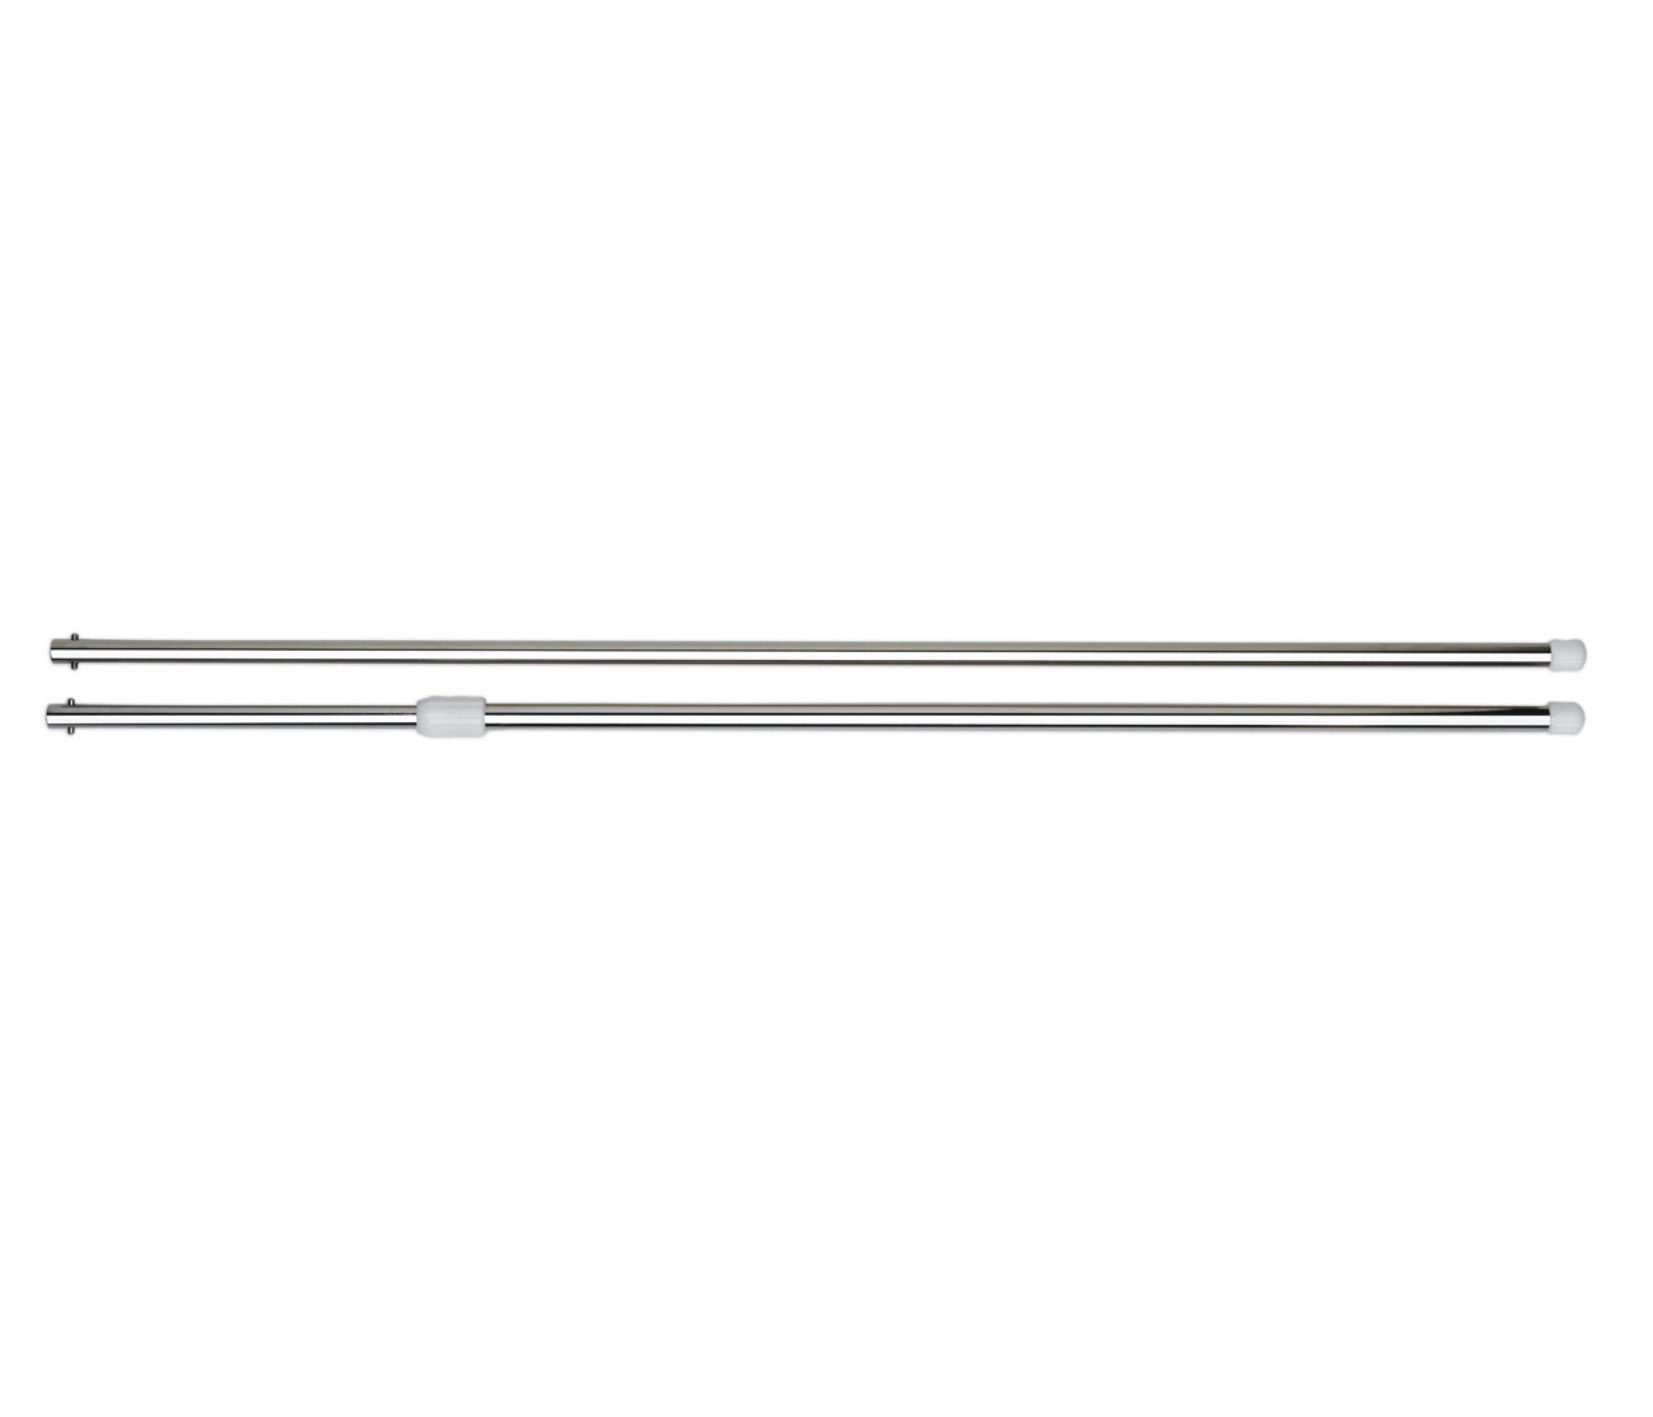 Cleanroom telescopic handle made of stainless steel, autoclavable and disinfectant-resistant, up to cleanroom class ISO 3 (GMP A/B)